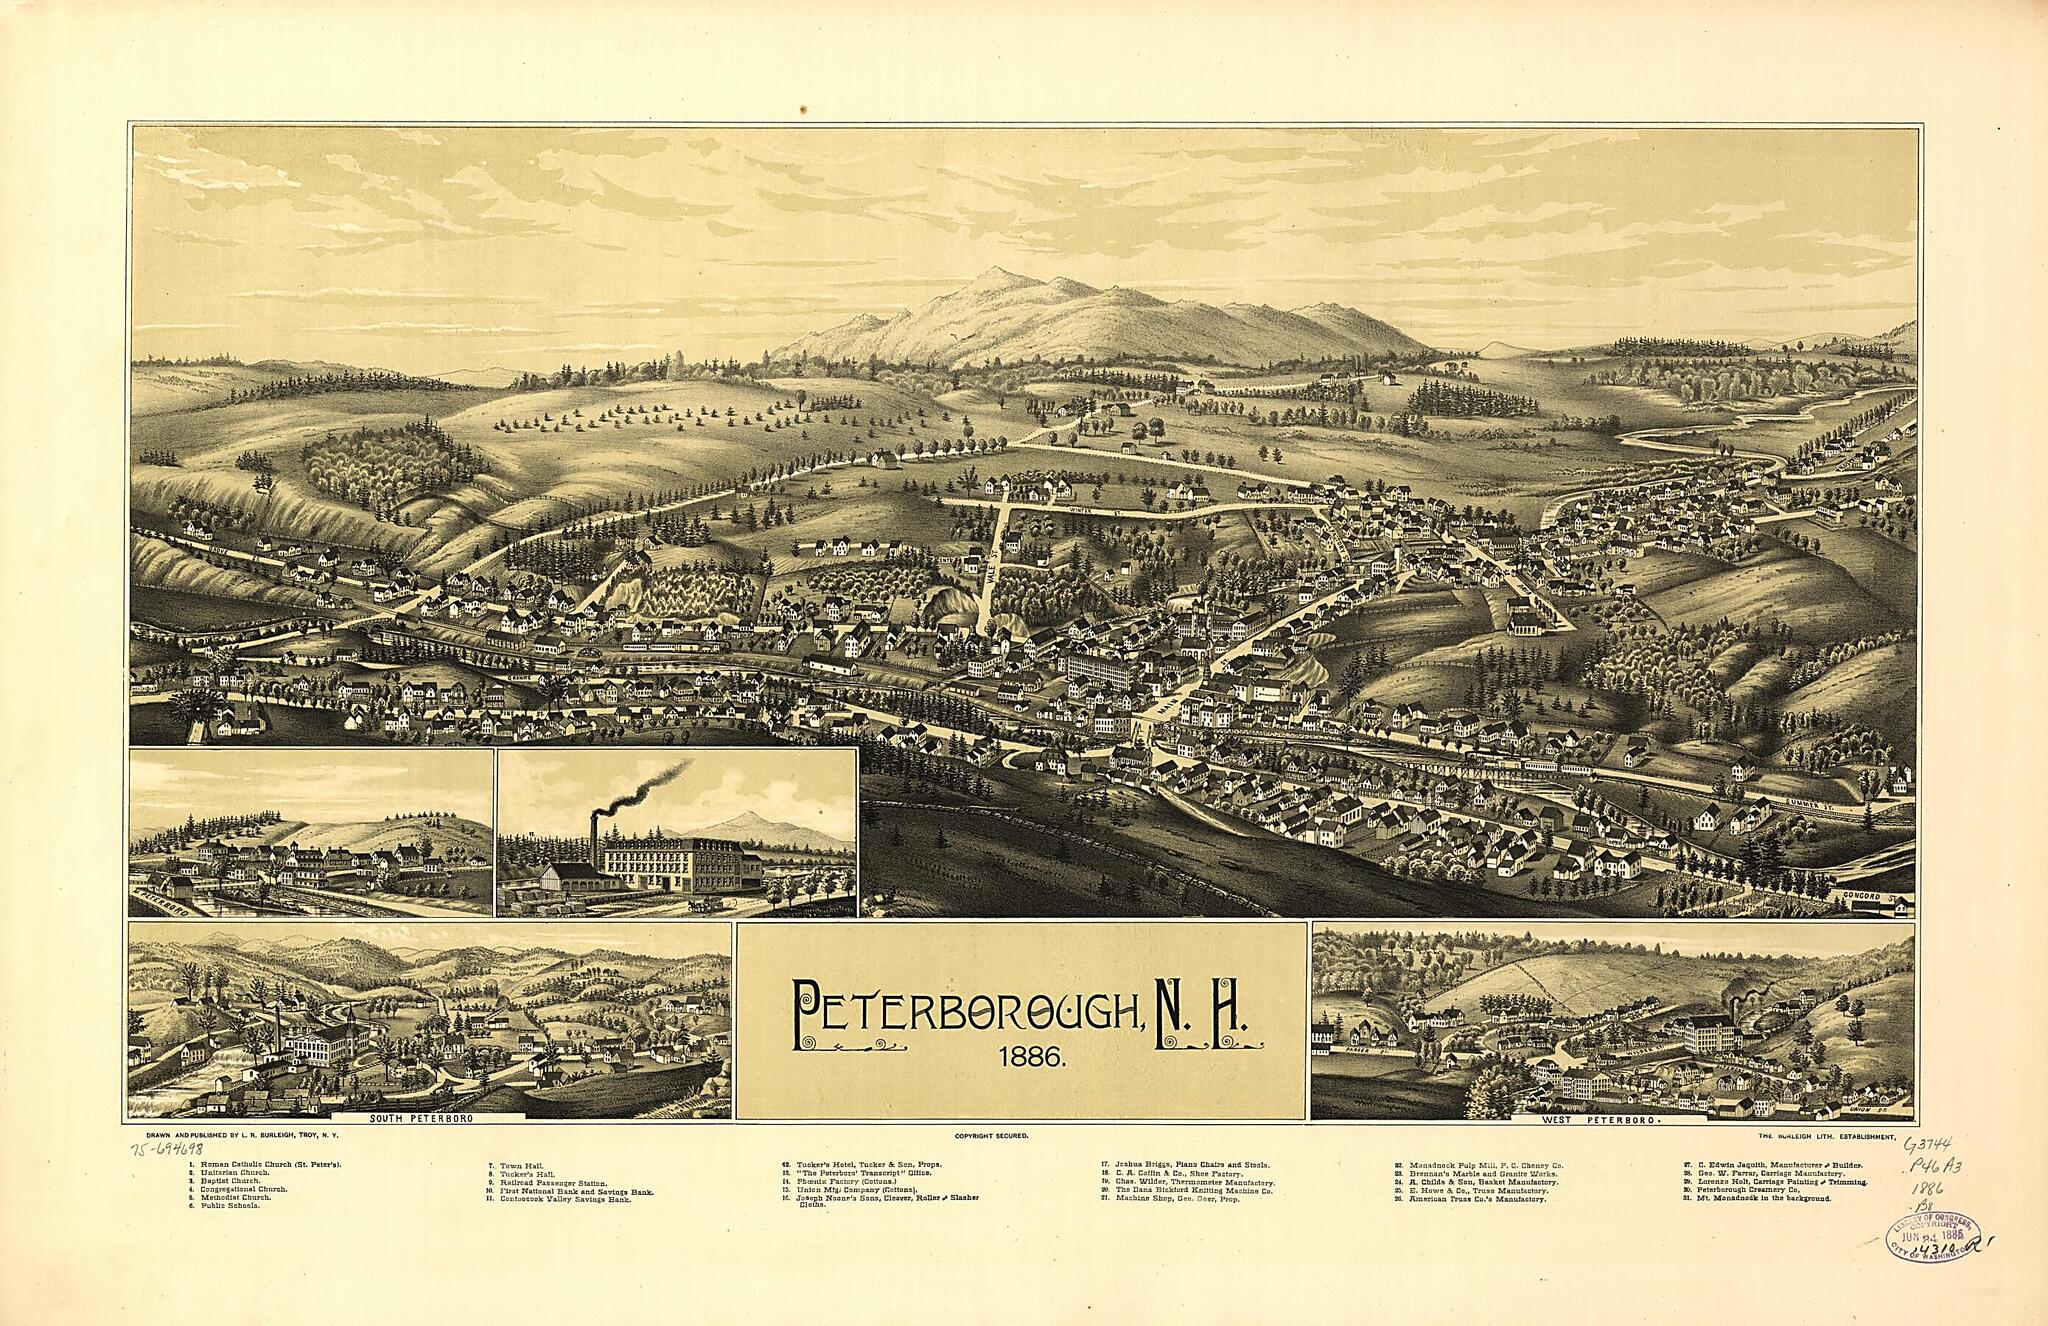 This old map of Peterborough, New Hampshire from 1886 was created by  Burleigh Litho, L. R. (Lucien R.) Burleigh in 1886